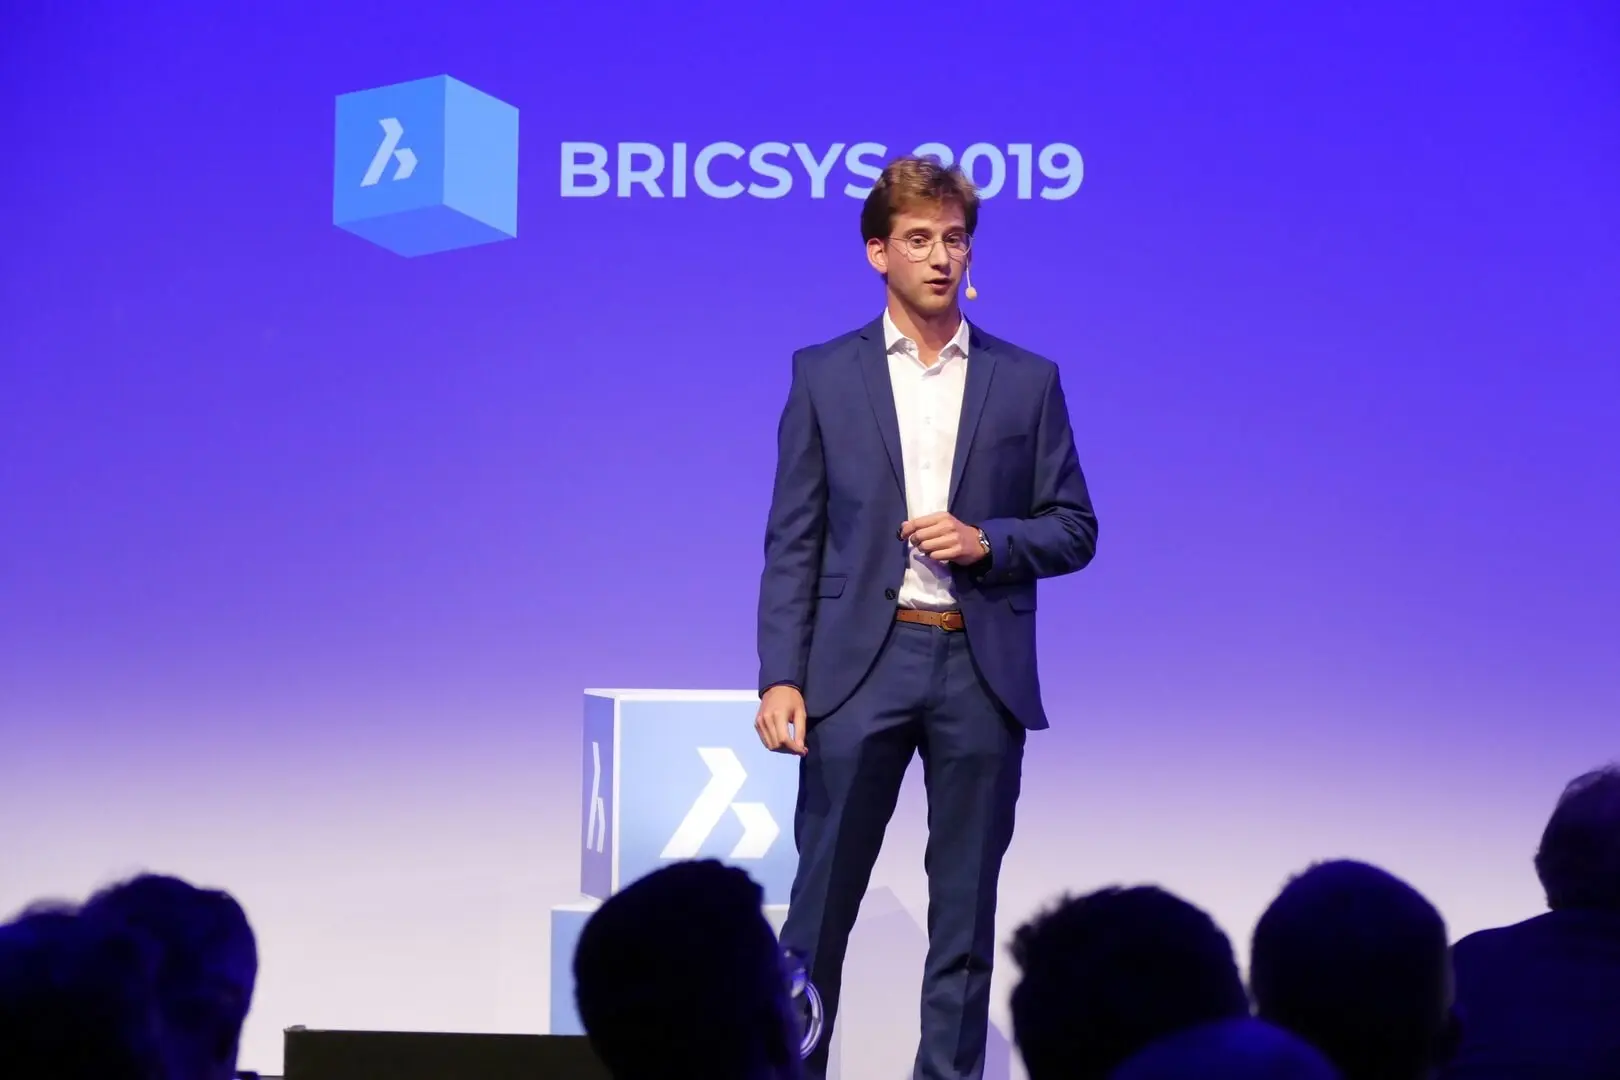 This was Bricsys Conference 2019- 20191010 162032